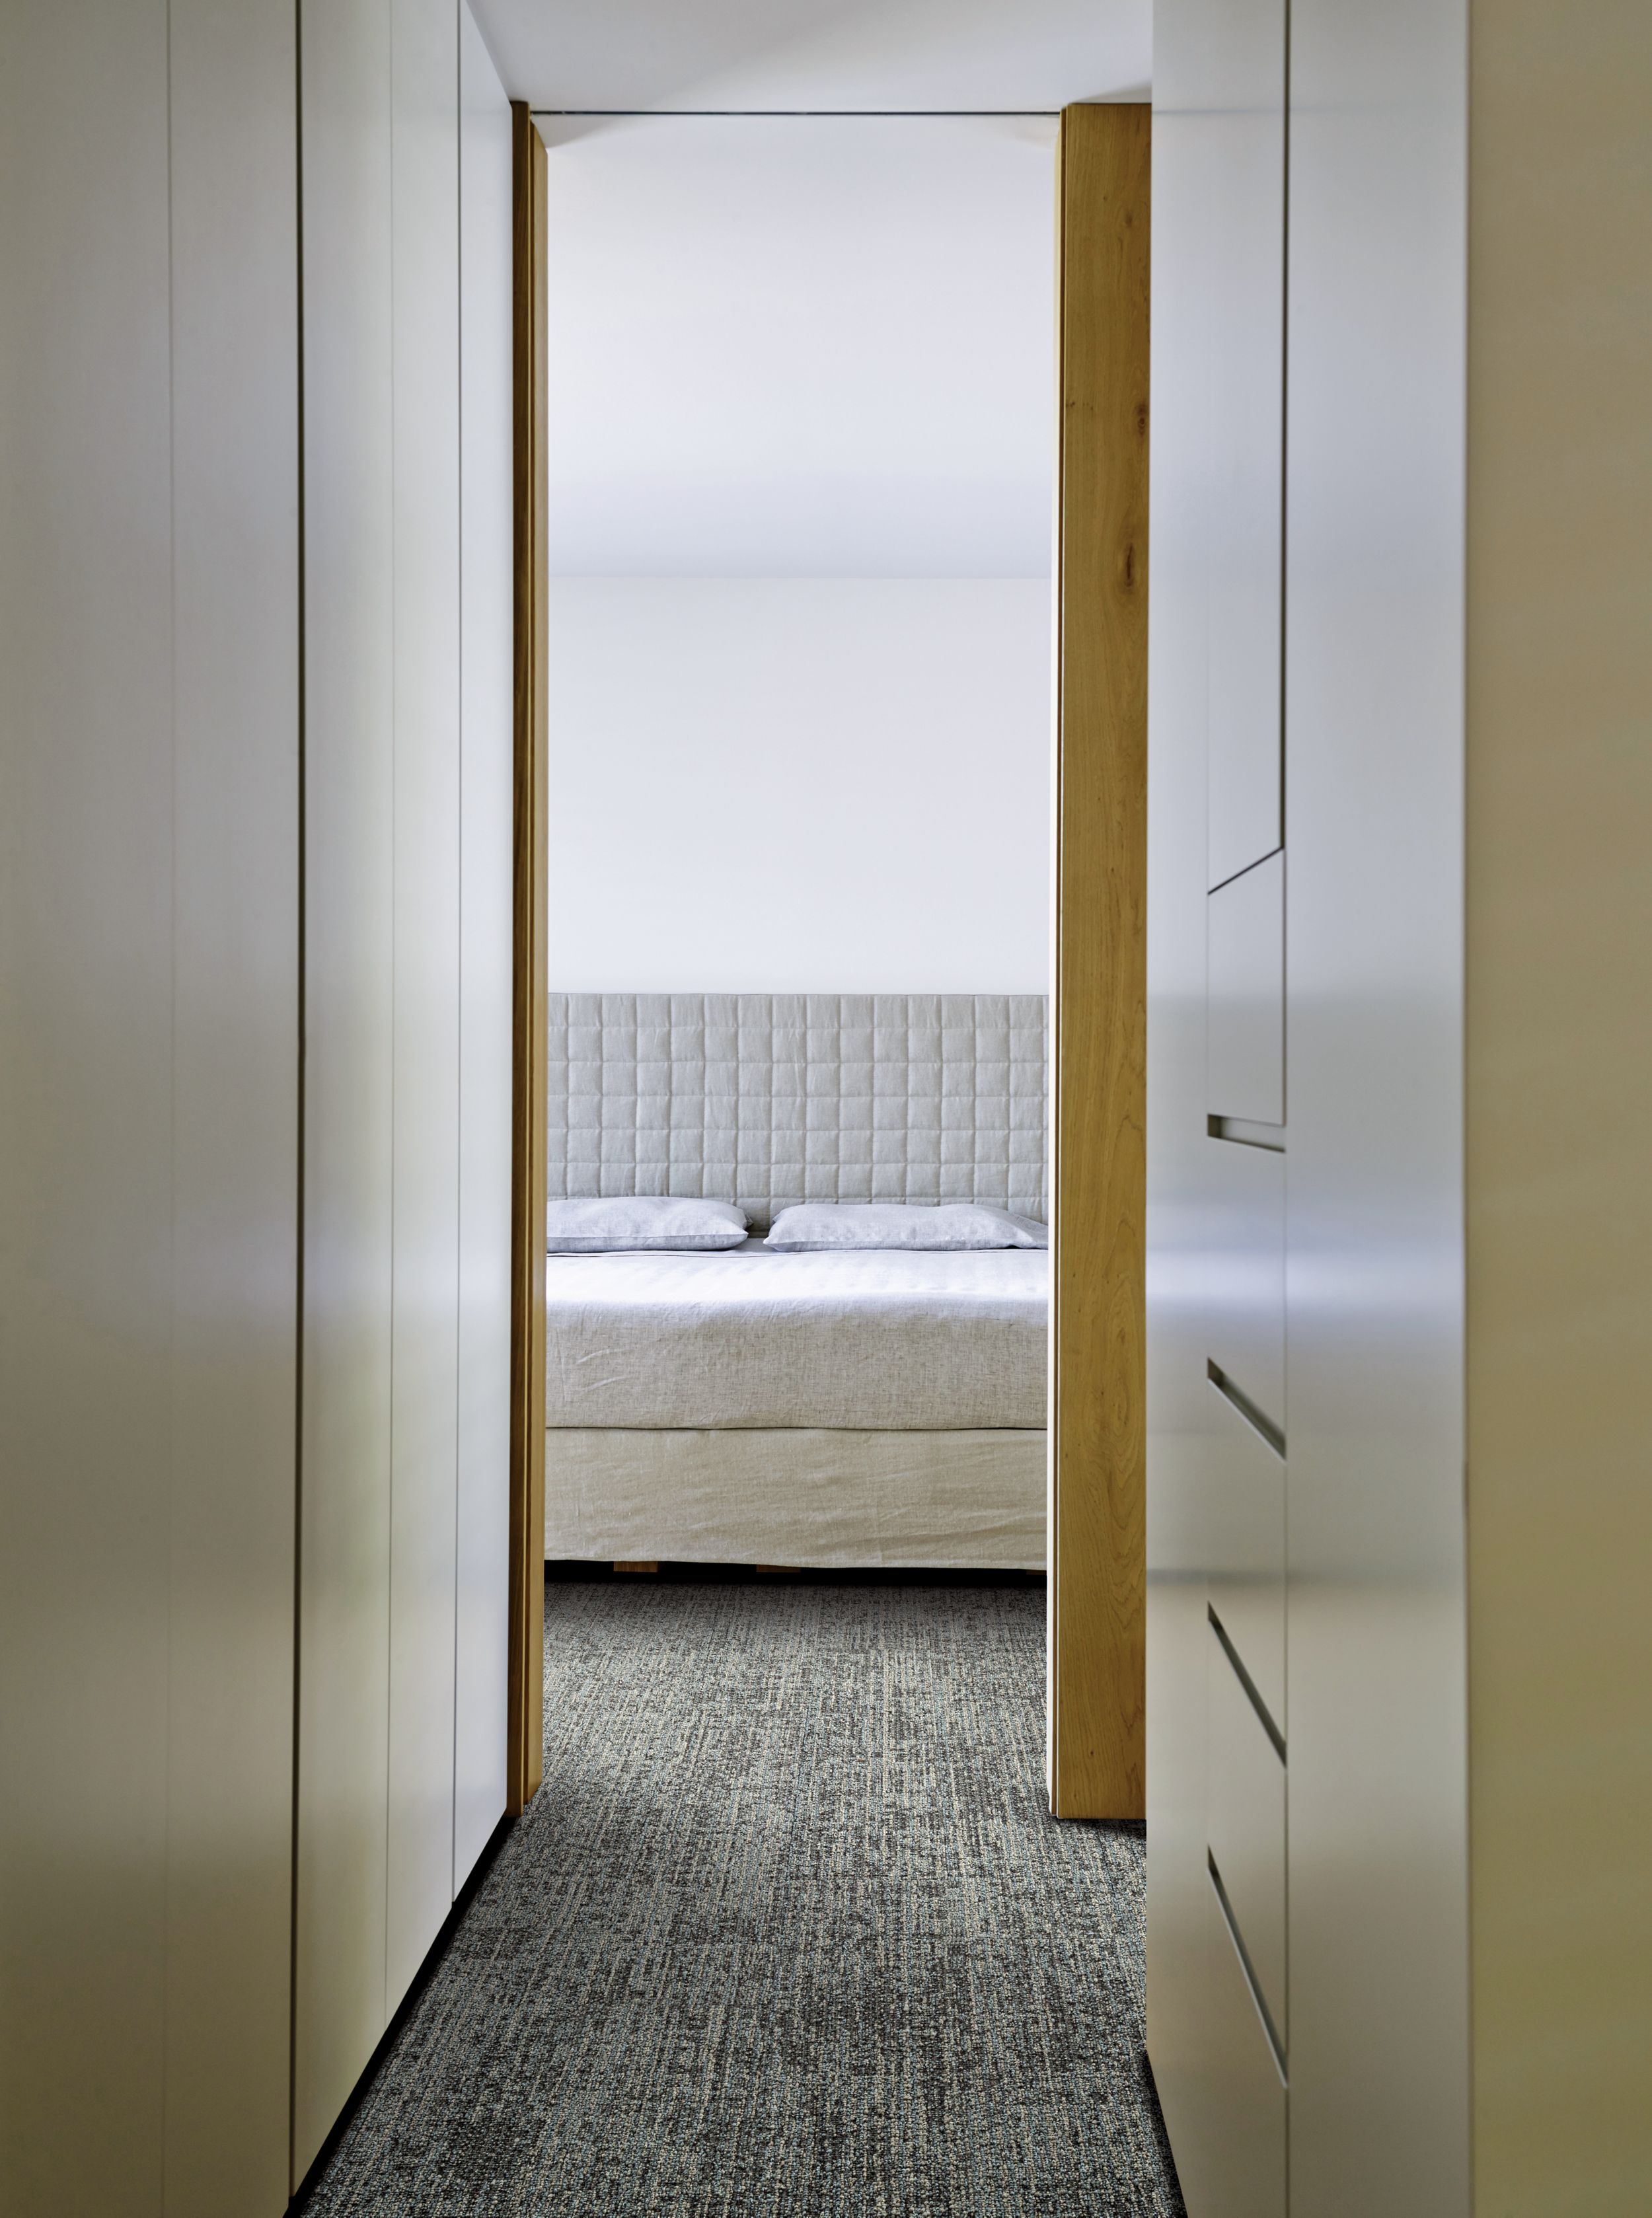 Narrow view off Interface RMS 511 plank carpet tile in hotel guest room imagen número 5